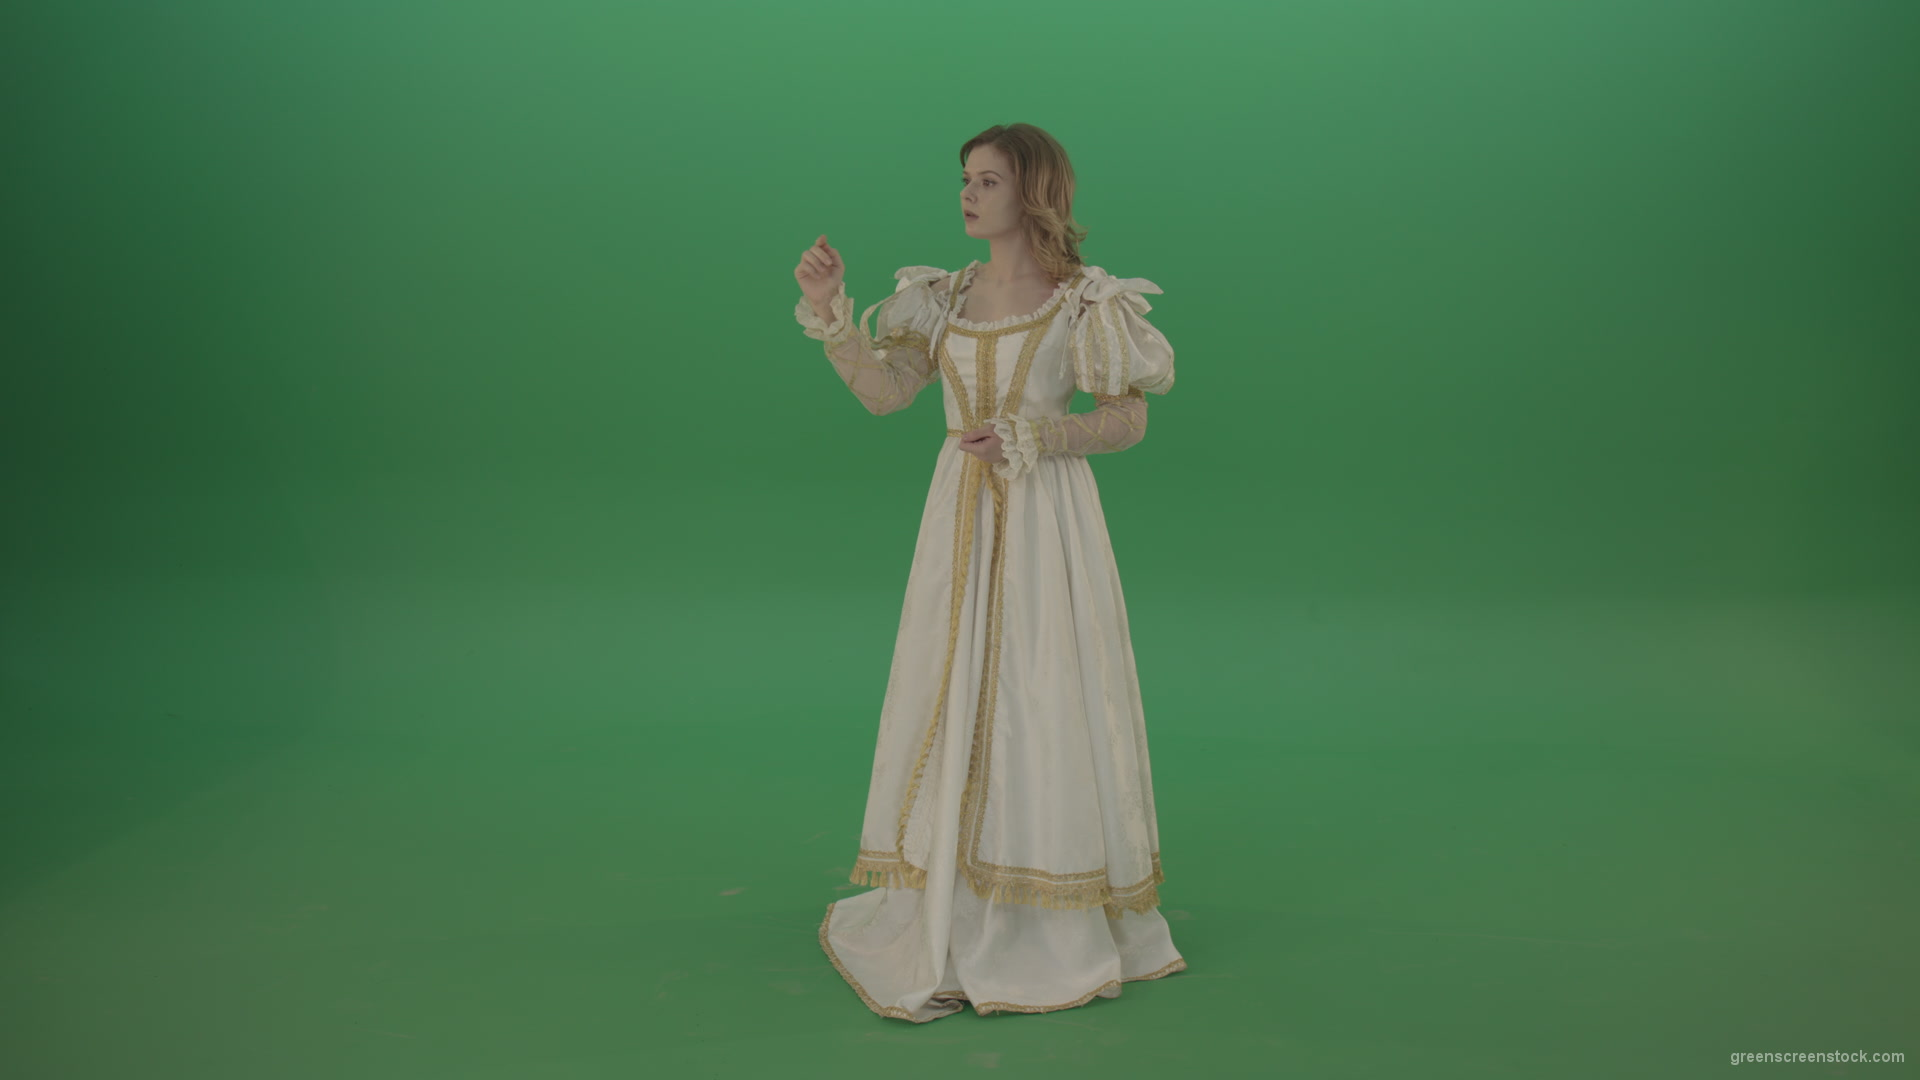 Flips-the-touchscreen-princess-in-a-white-dress-isolated-on-green-screen_007 Green Screen Stock